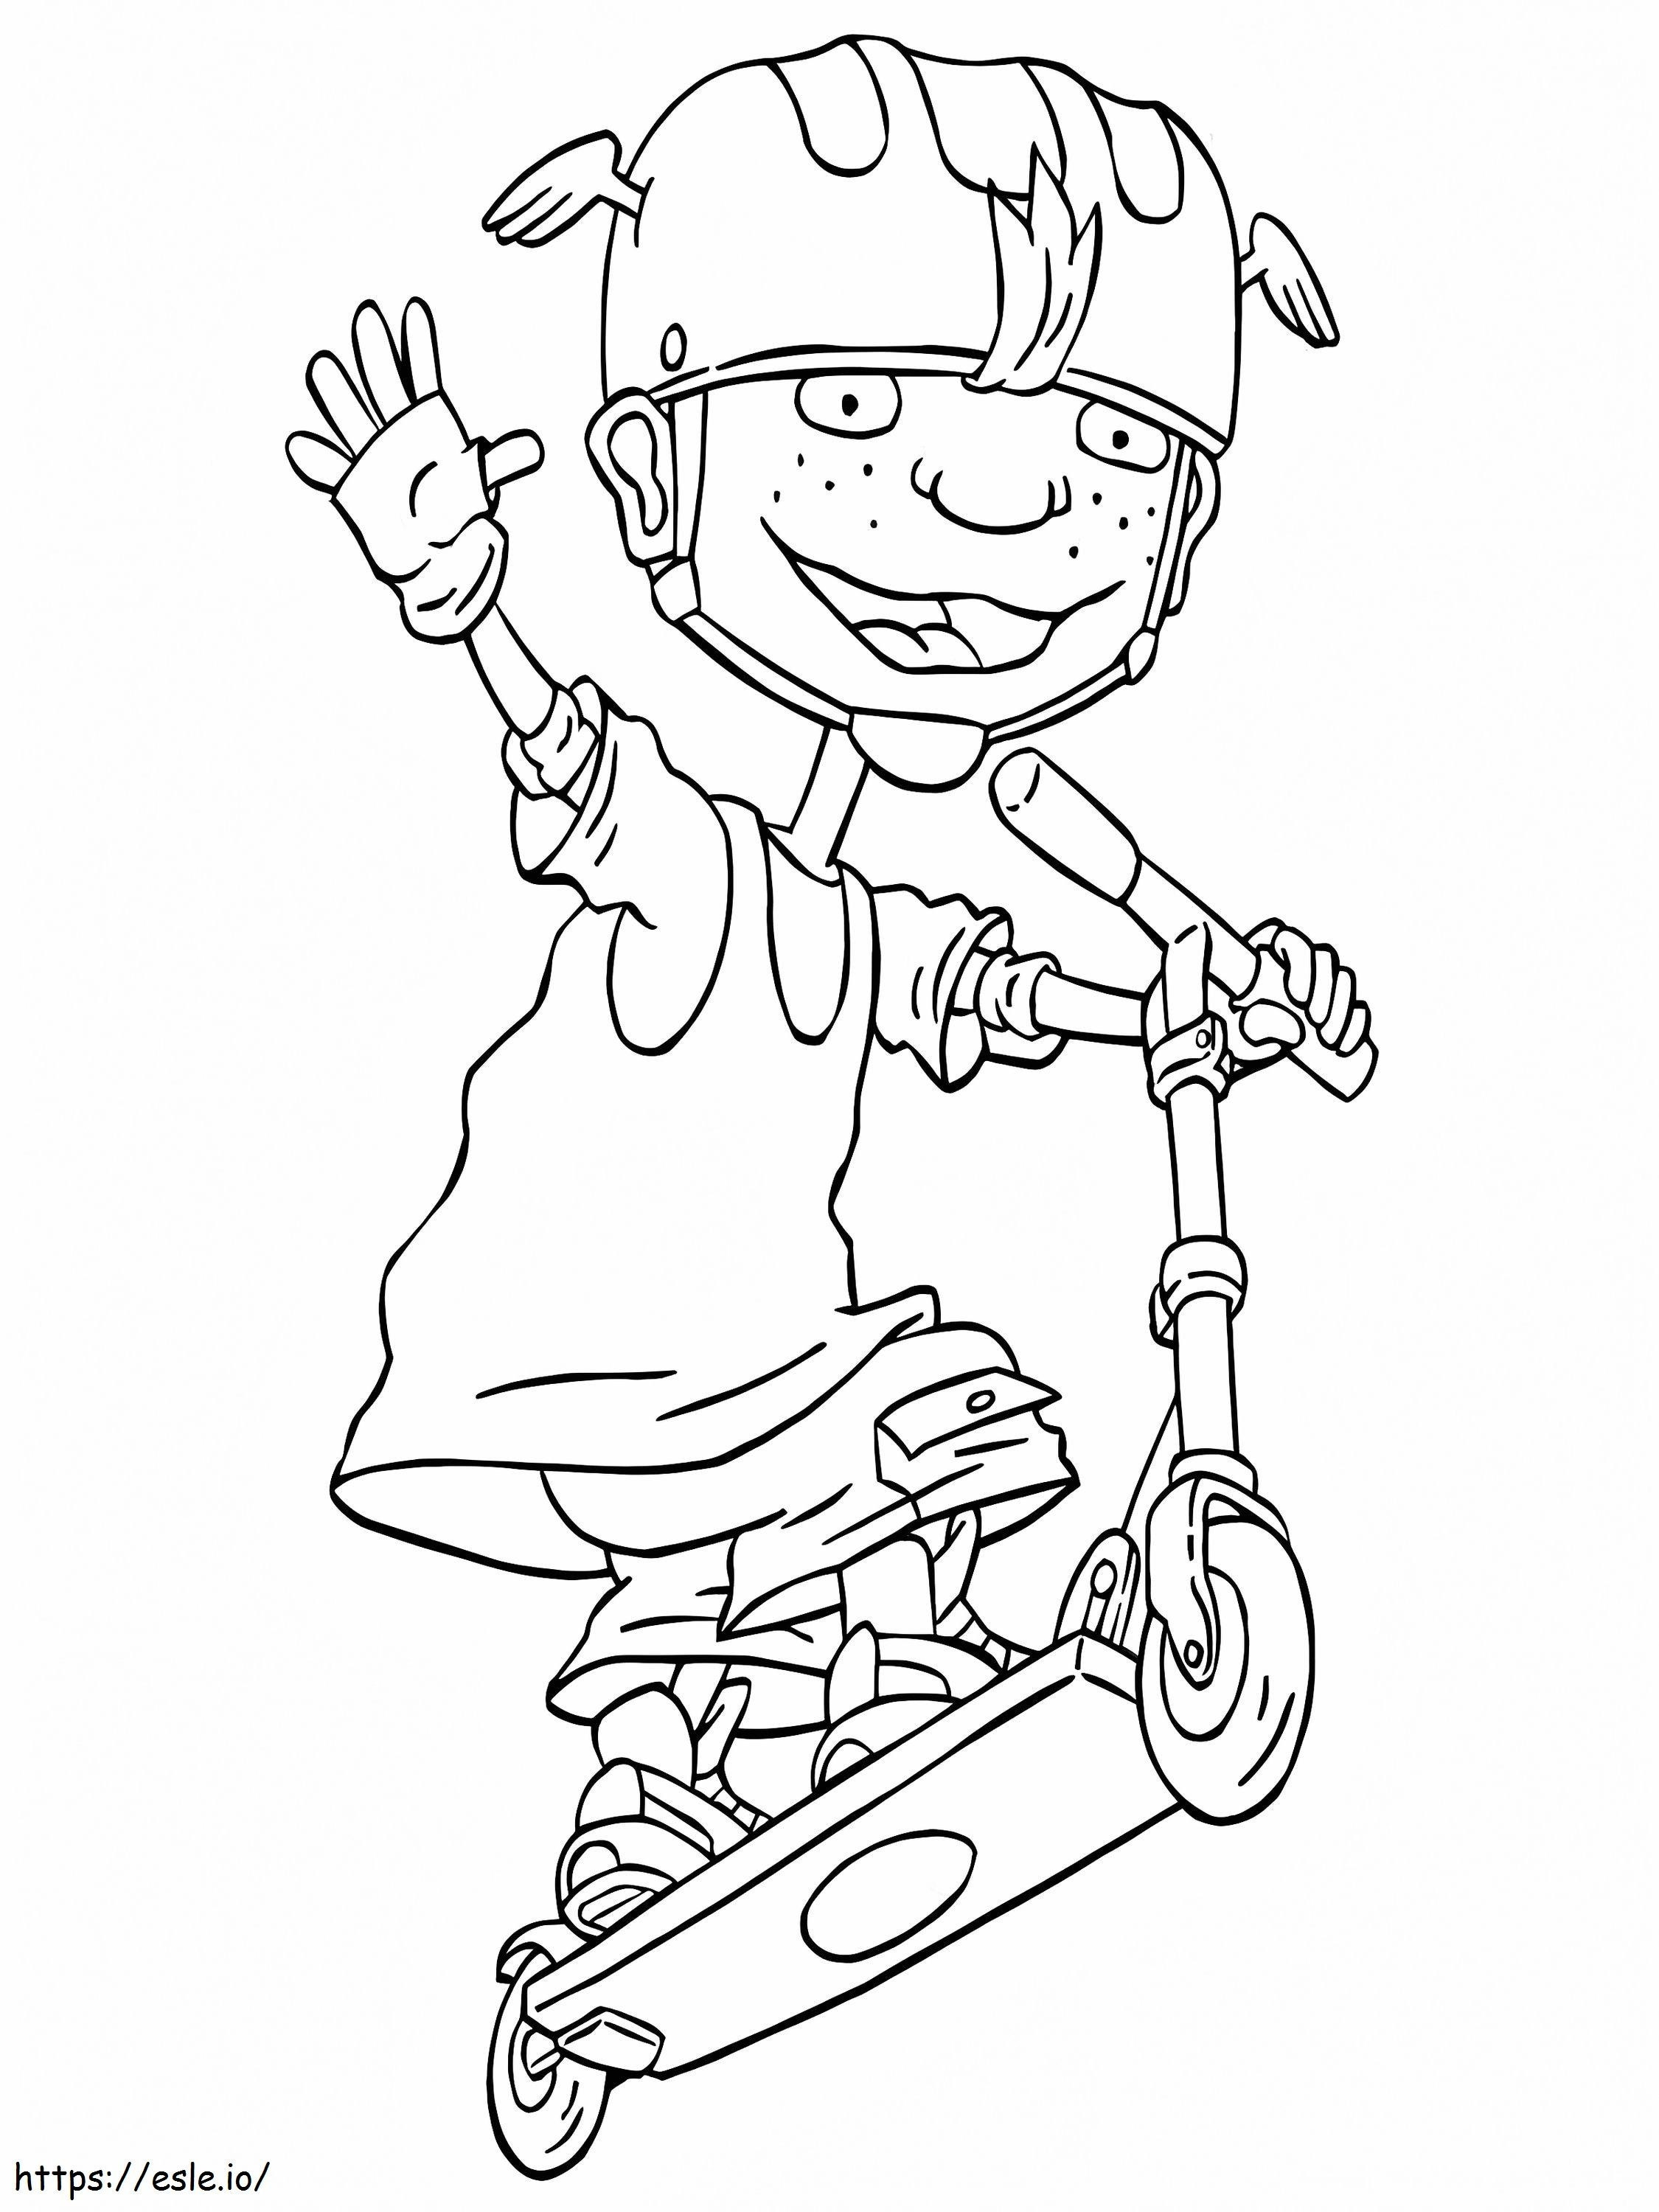 Rocket Power 9 coloring page